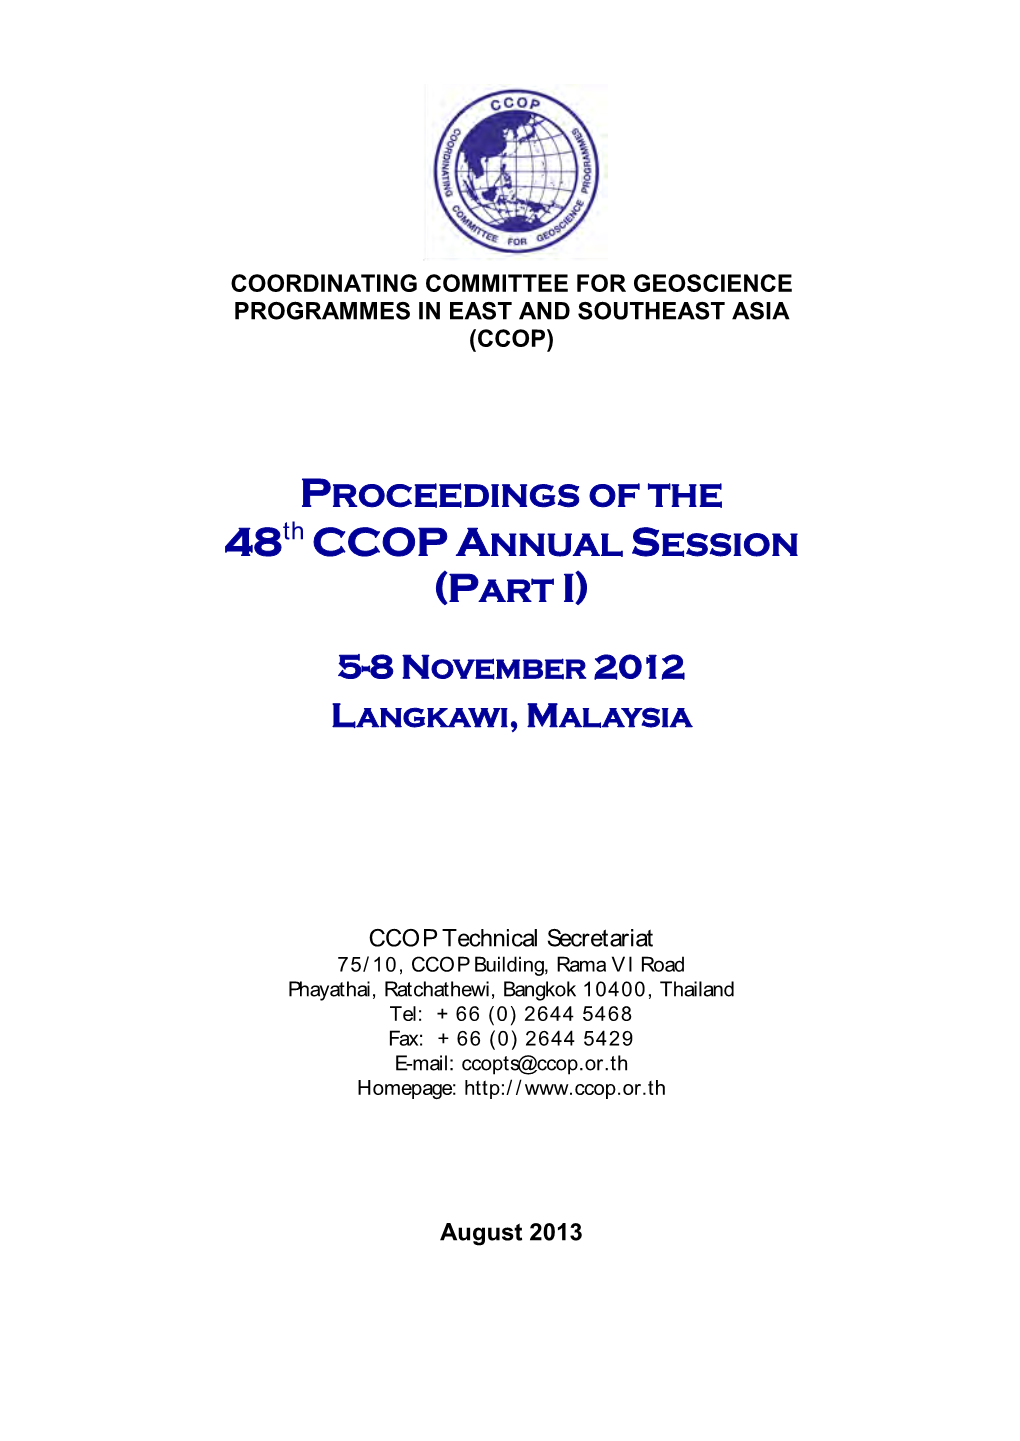 PROCEEDINGS of the 48Th CCOP ANNUAL SESSION (PART I) 5-8